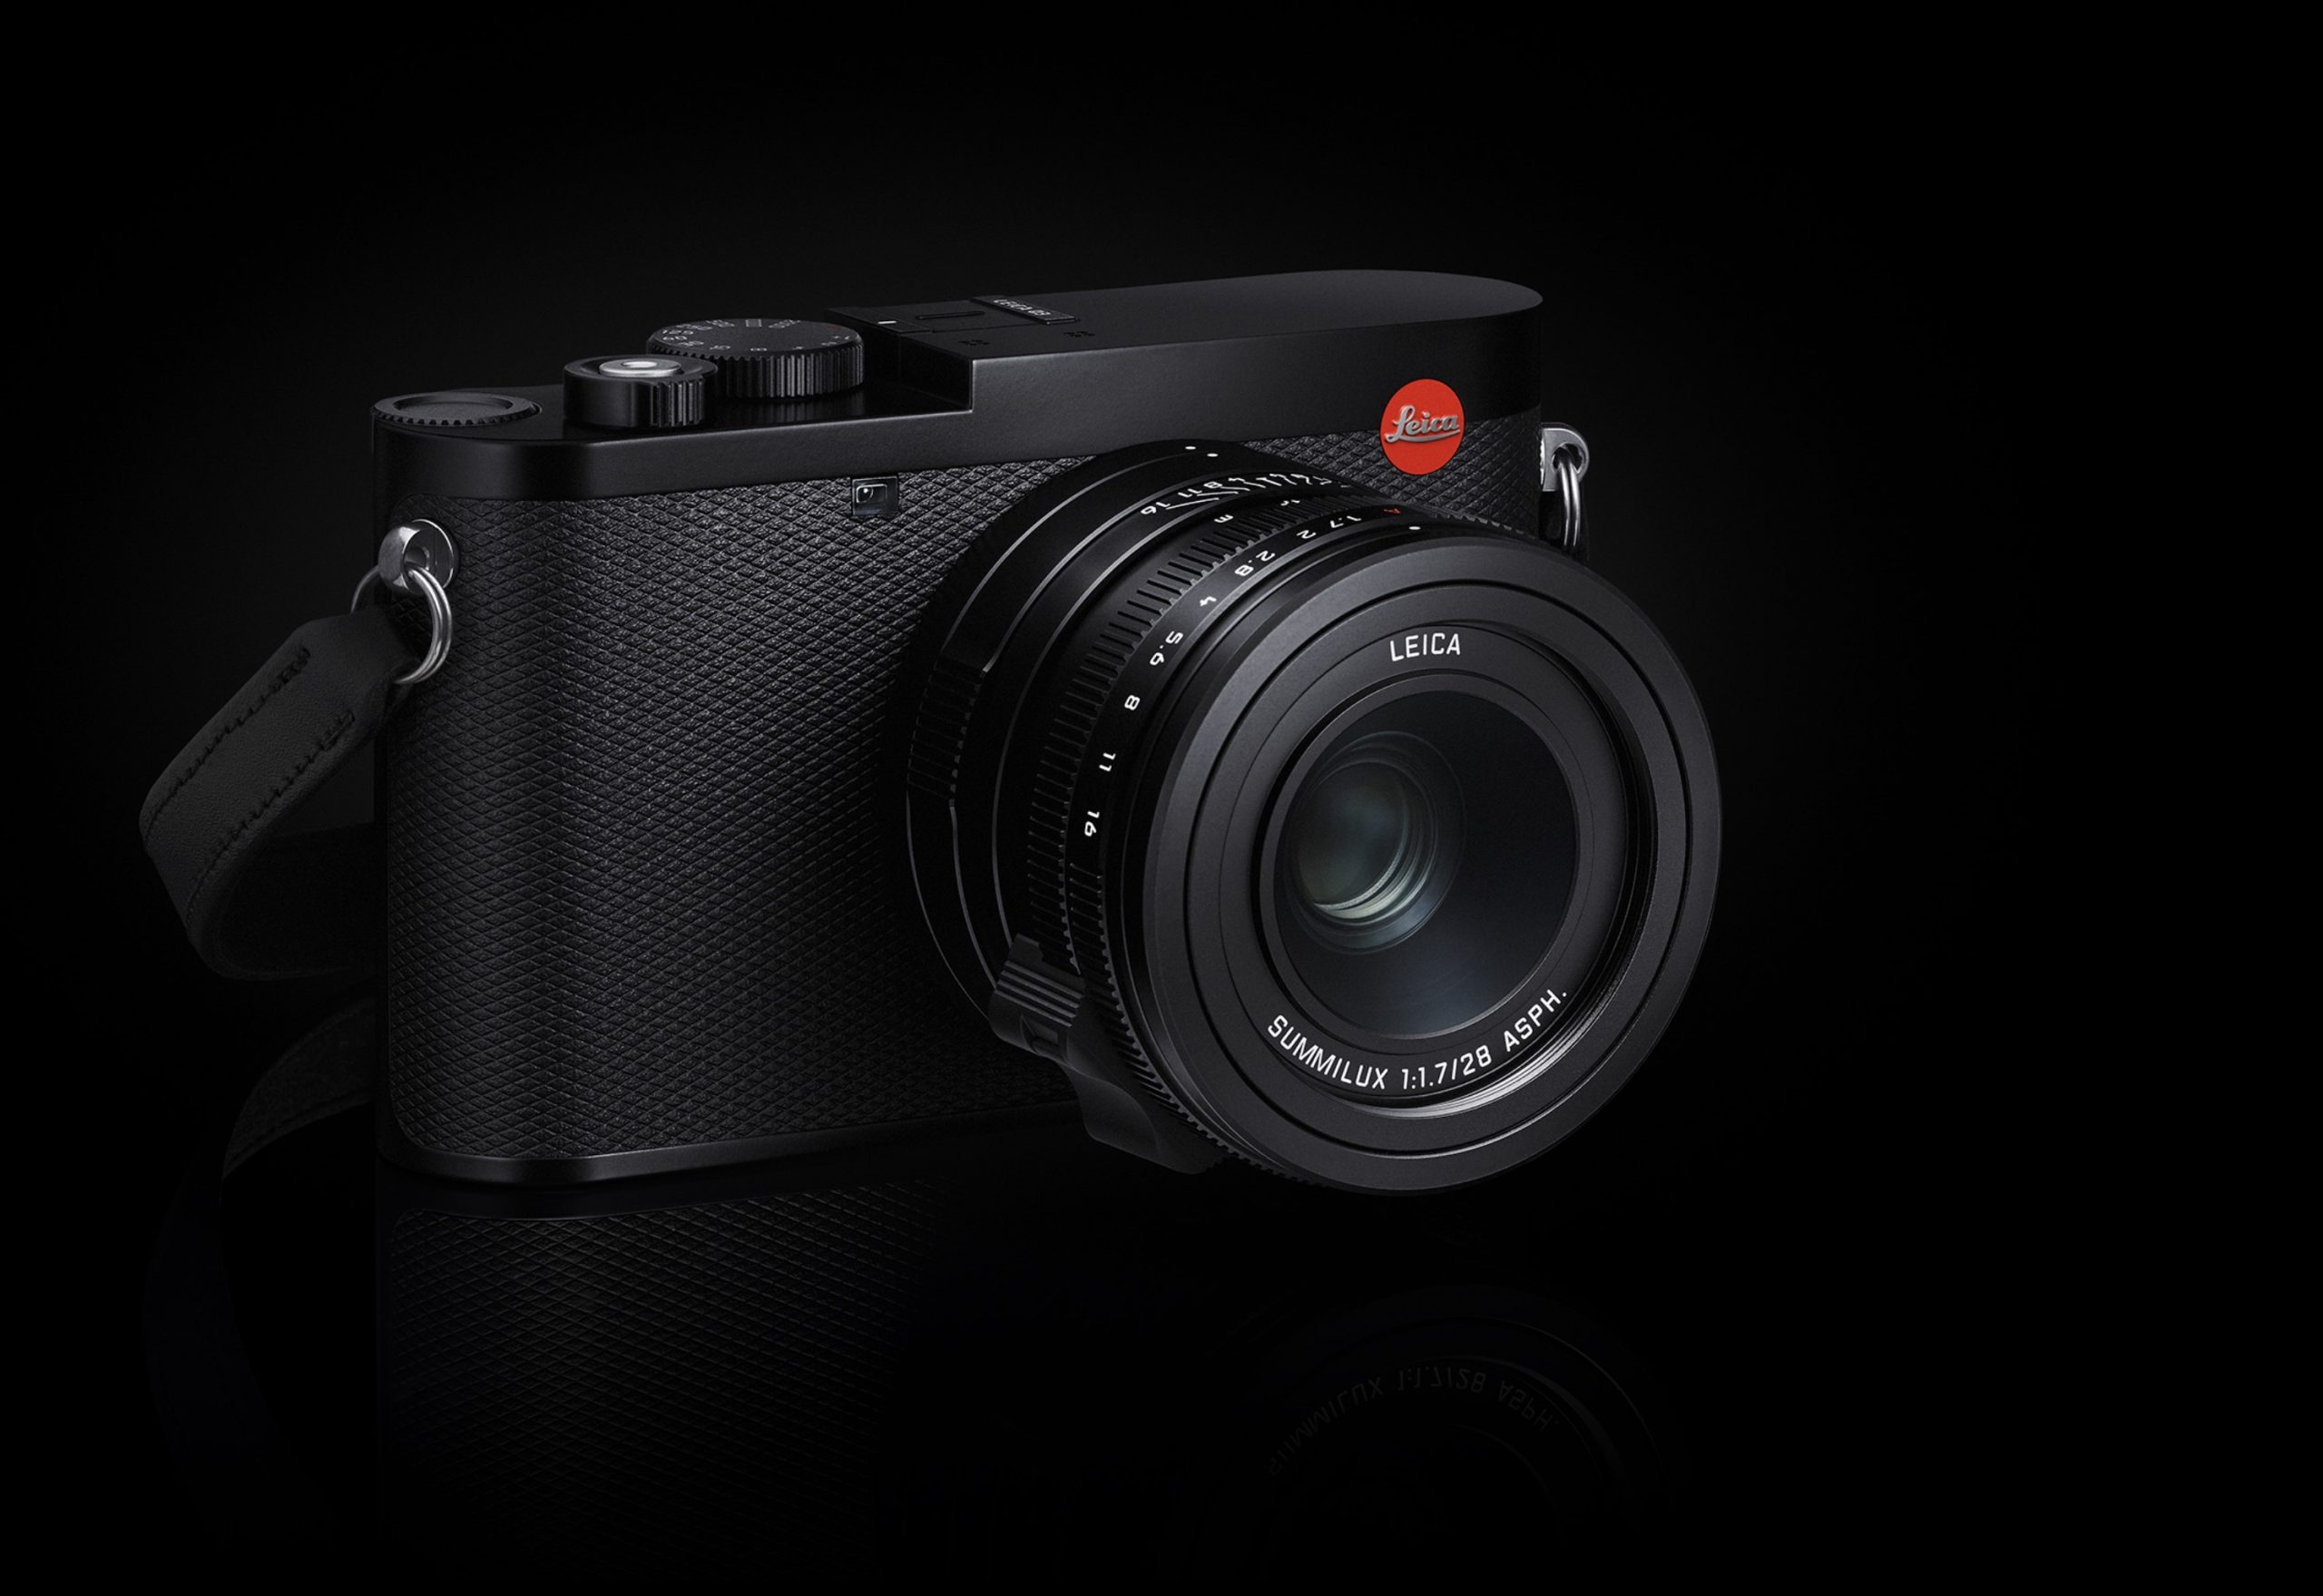 This Leica costs $100,000 - and it's not even a real camera